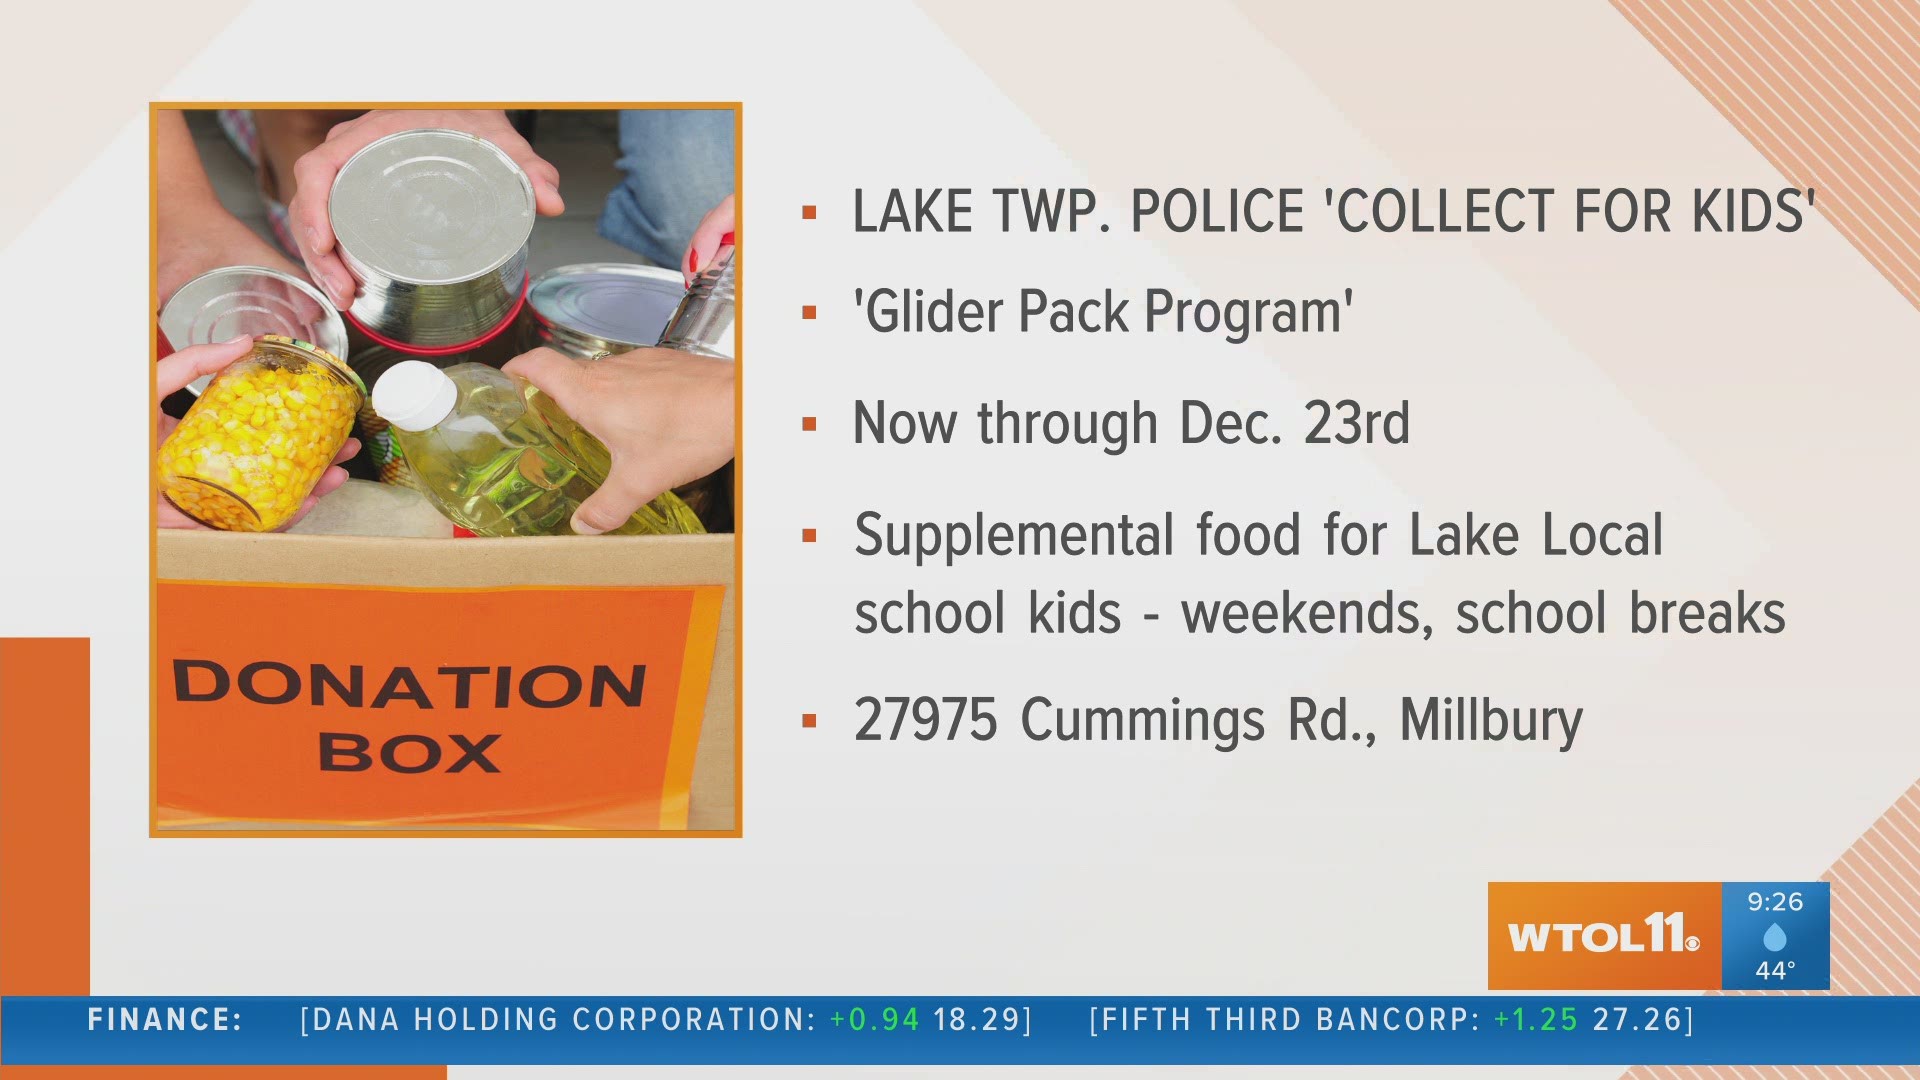 Through the Glider Pack Program, Lake Township police are making sure kids have access to meals, even if they're not in school!